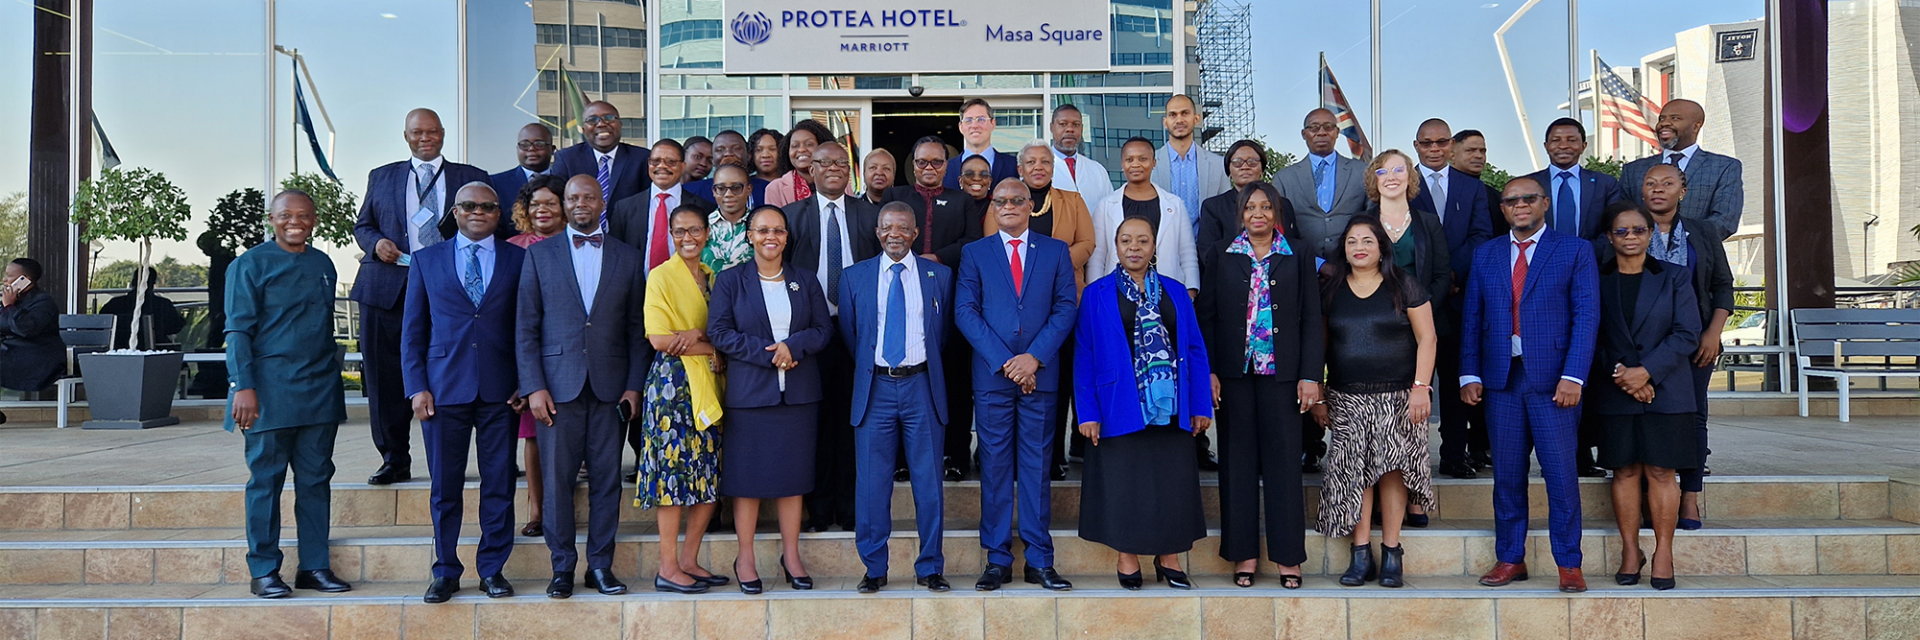 SADC National Planning Entities convene Second Annual Conference on “Planning and Execution of National Development Plans in the SADC Region”